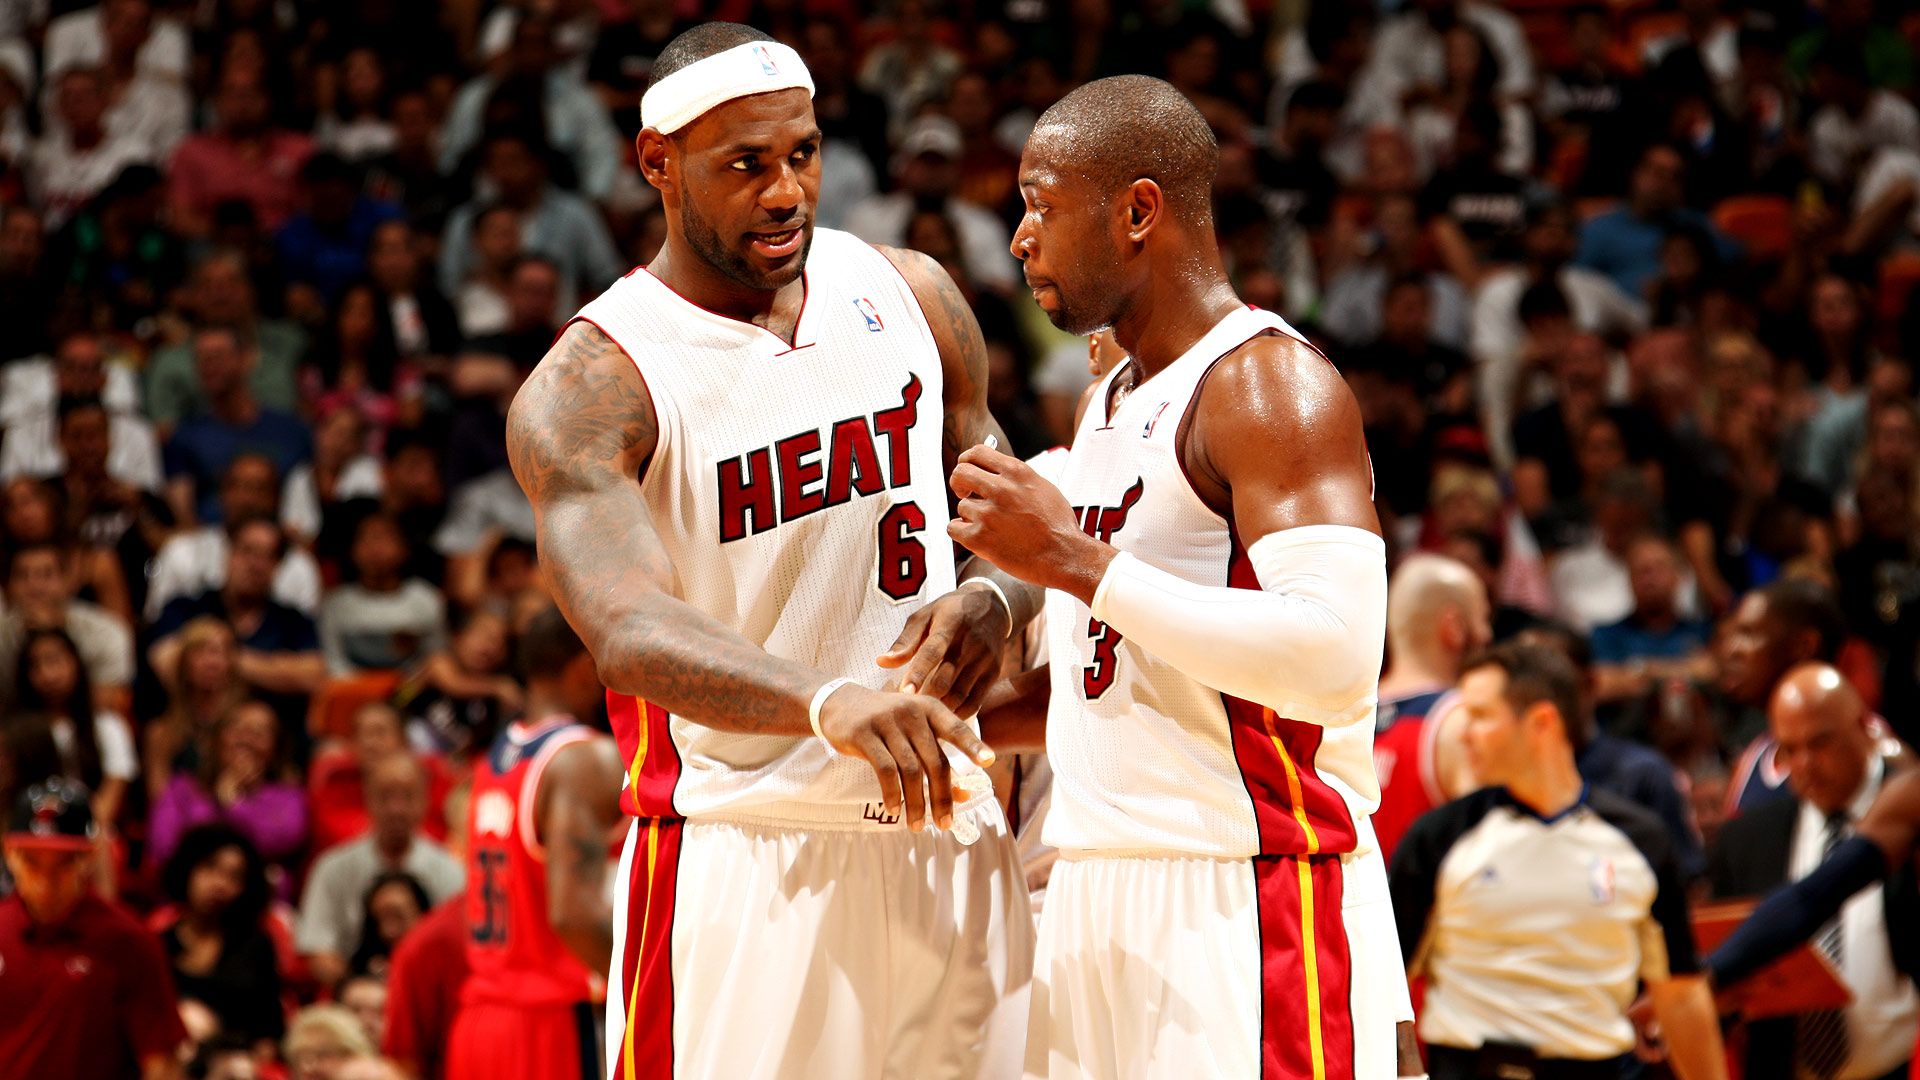 LeBron James says he can't envision leaving Miami Heat right now1920 x 1080